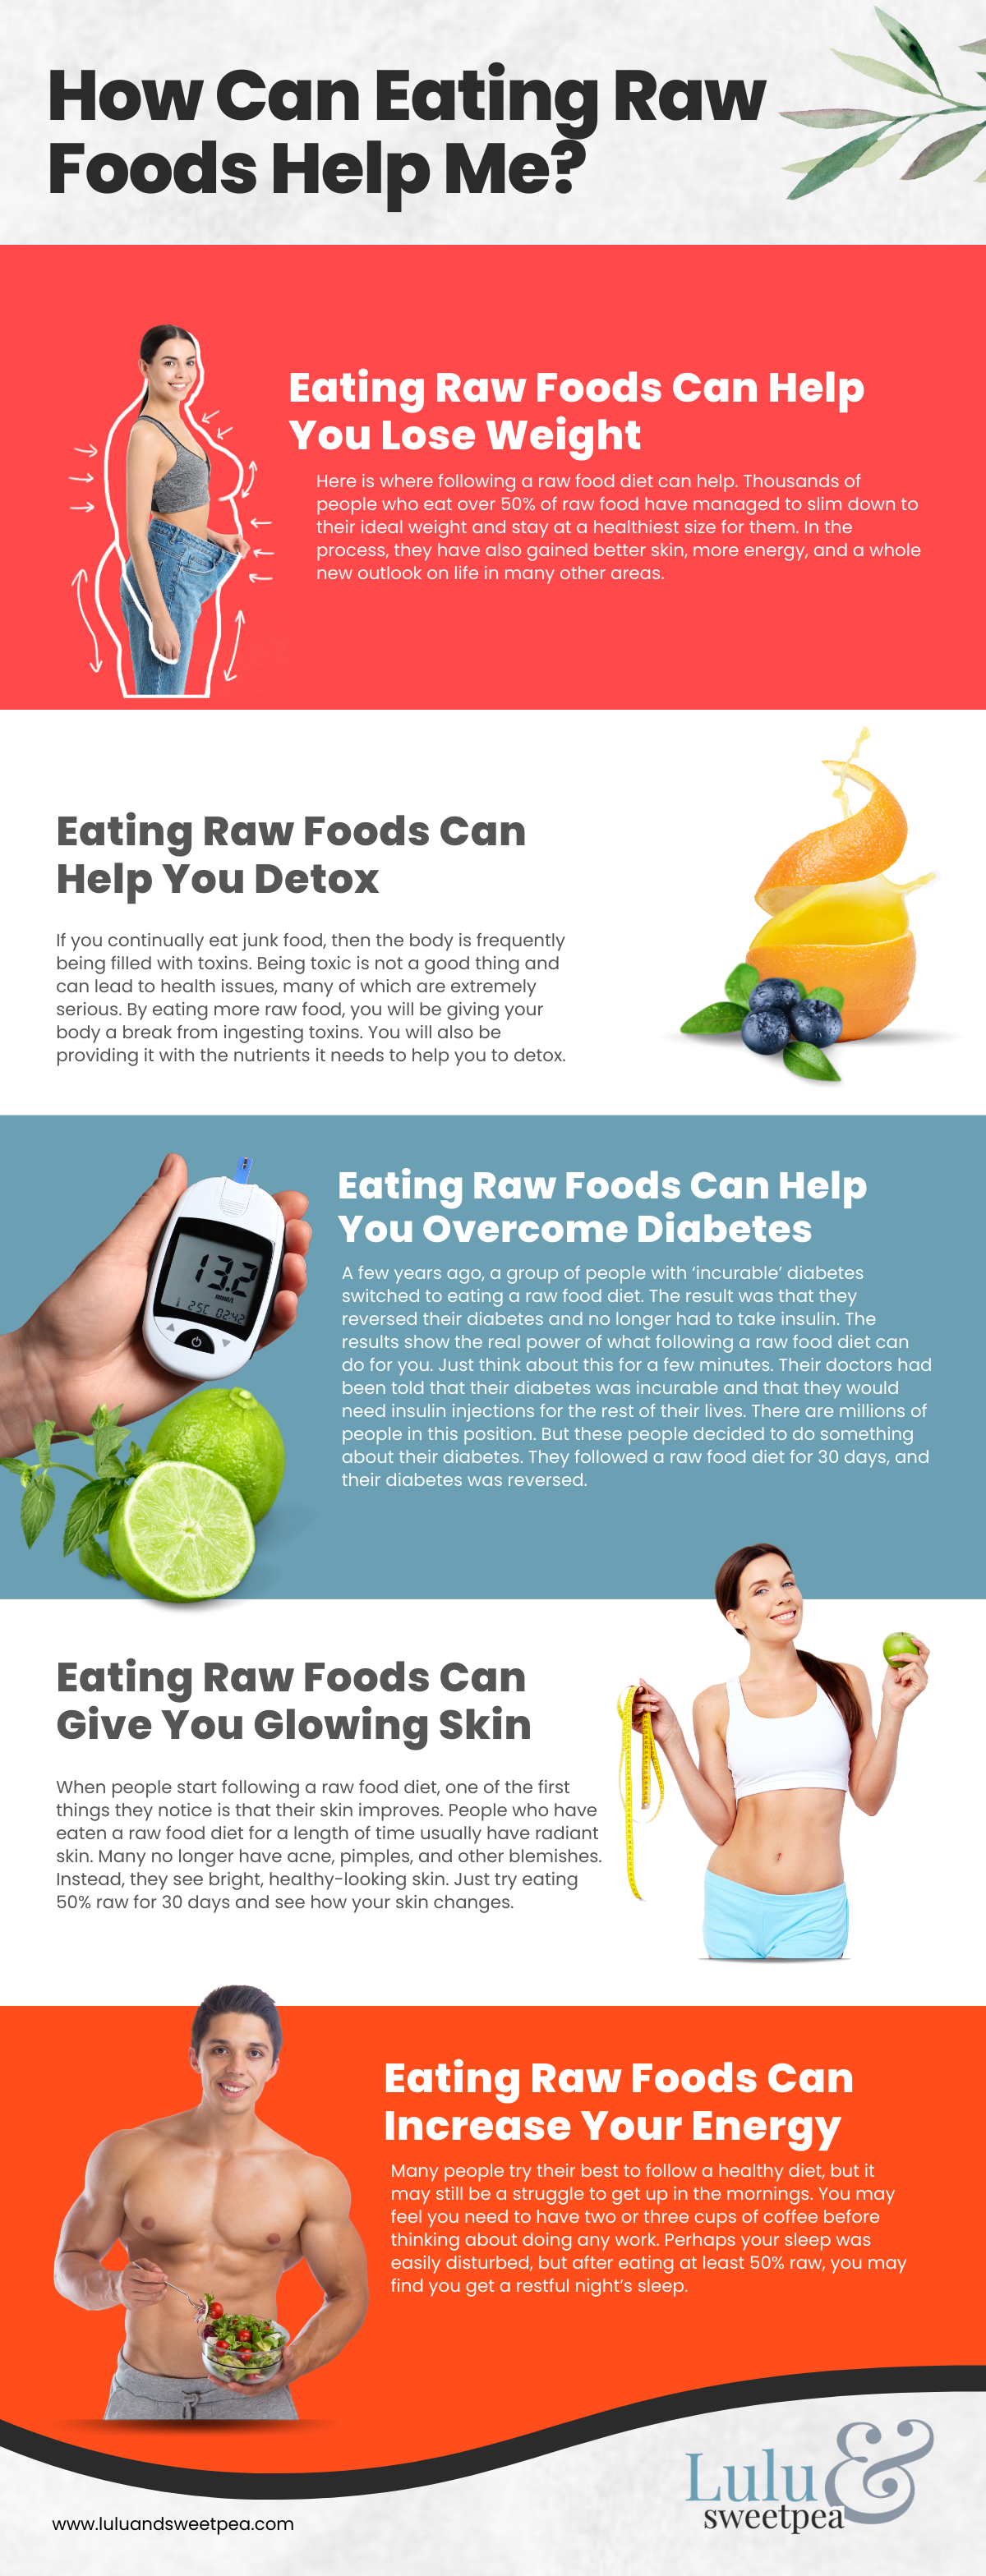 How Can Eating Raw Foods Help Me